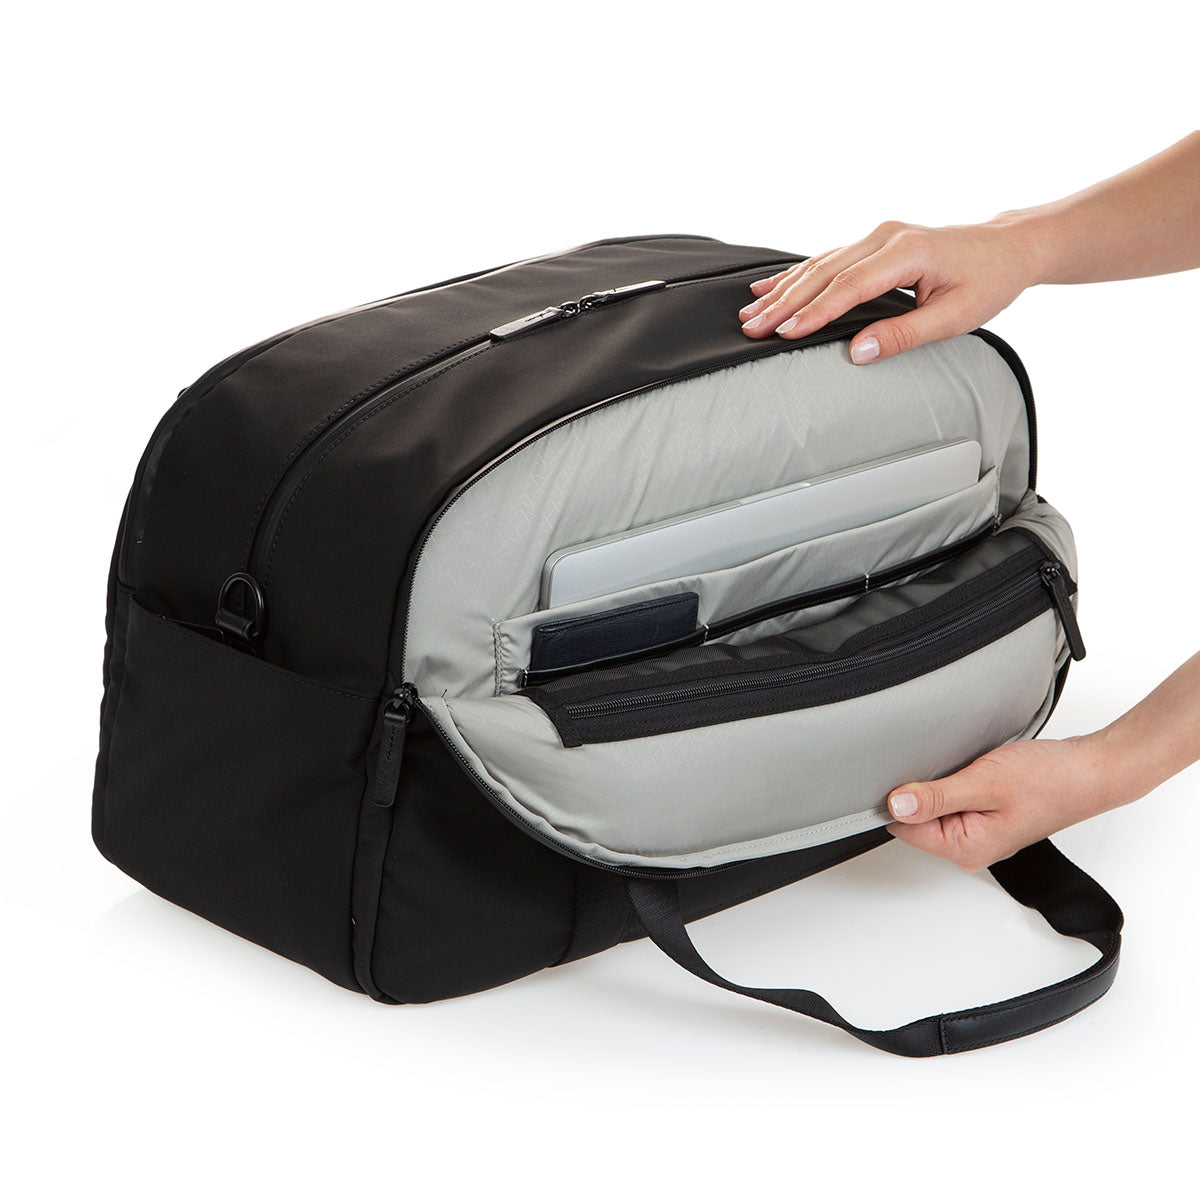 side view of black weekender with side pocket open showing laptop sleeve inside and three slip pockets for passport type items.